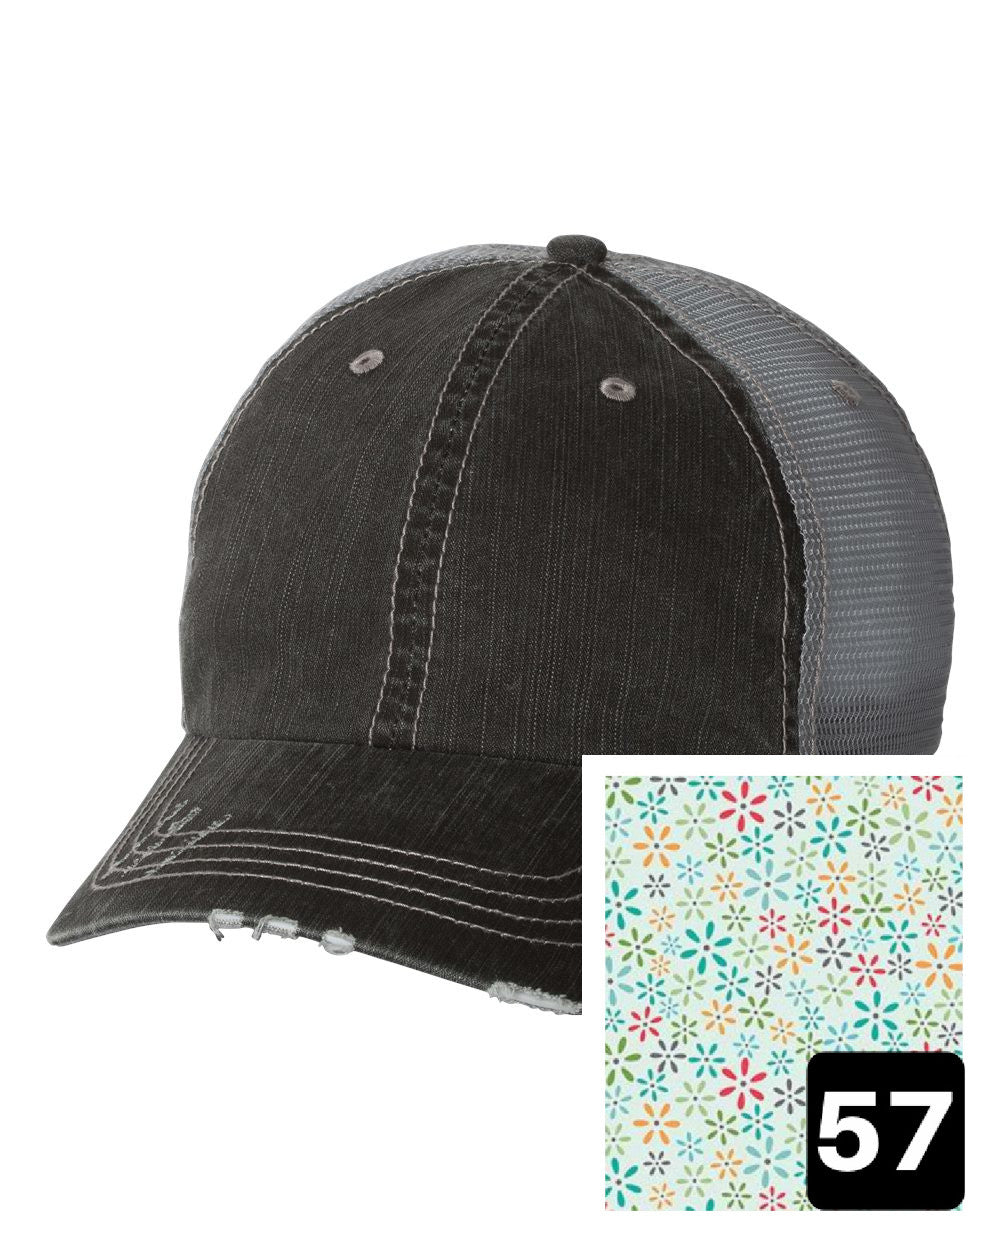 gray distressed trucker hat with white daisy on yellow fabric state of California